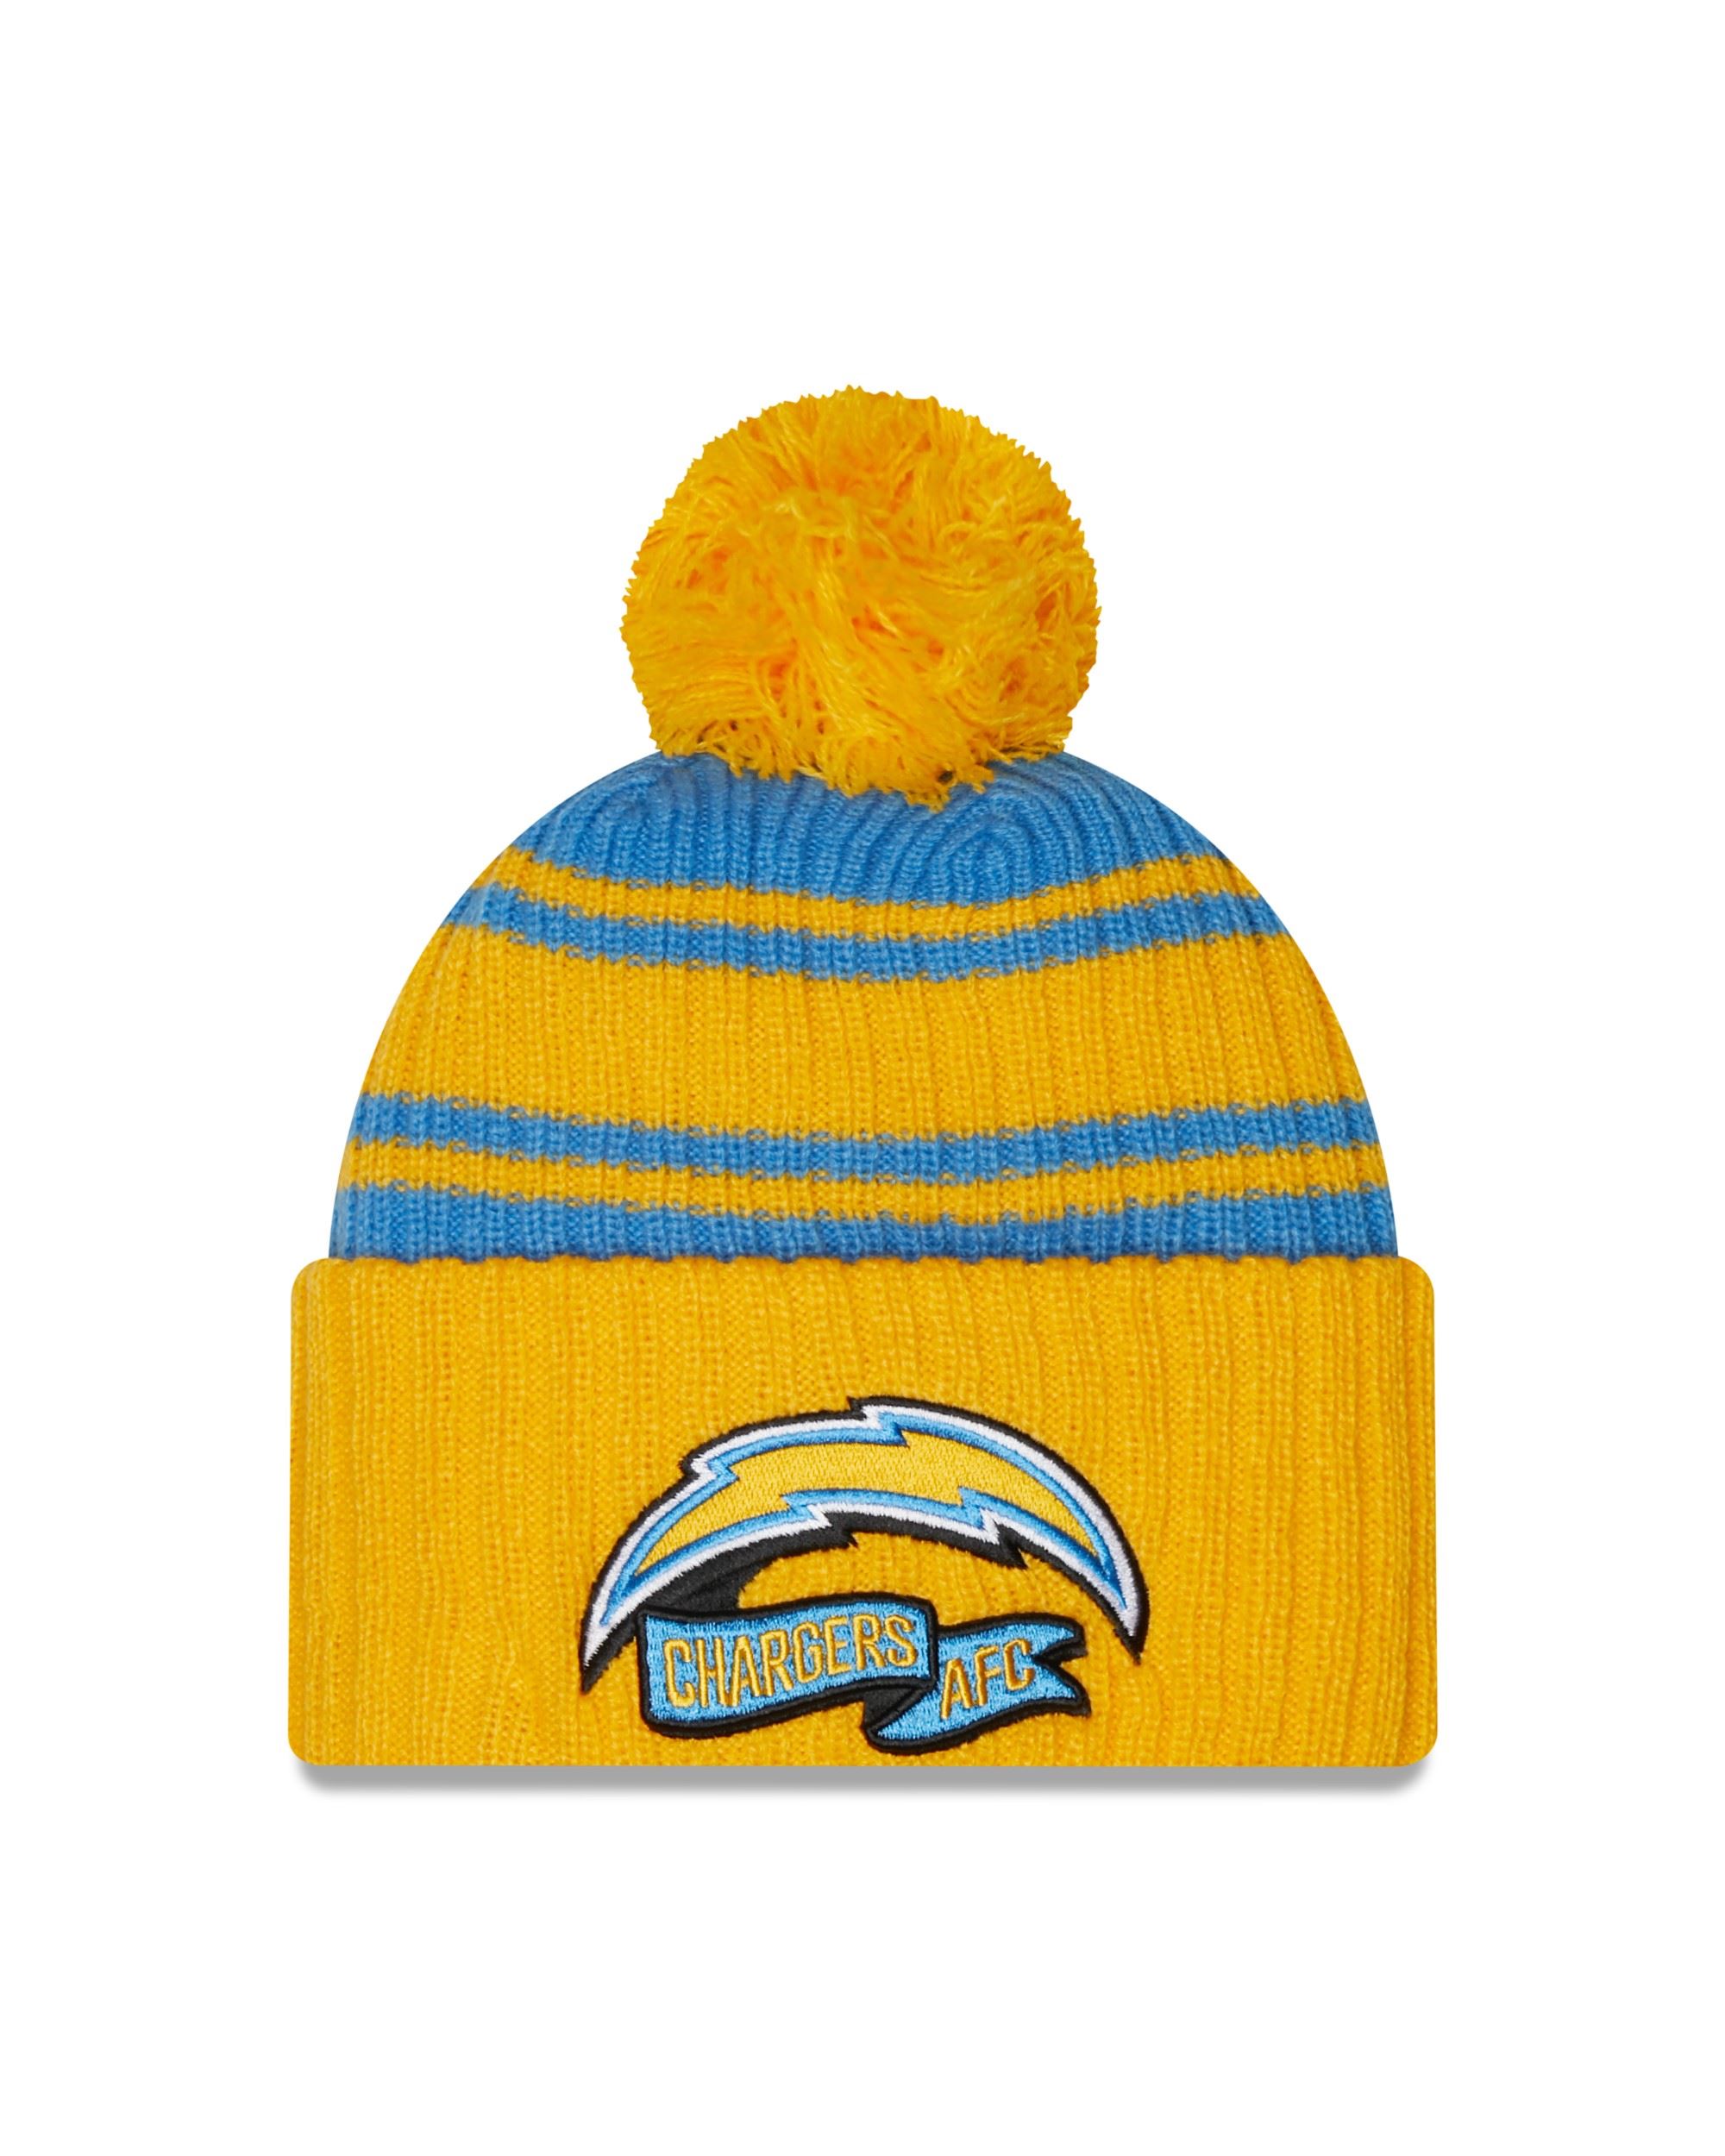 Los Angeles Chargers NFL 2022 Sideline Sport Knit Yellow Blue Beanie New Era